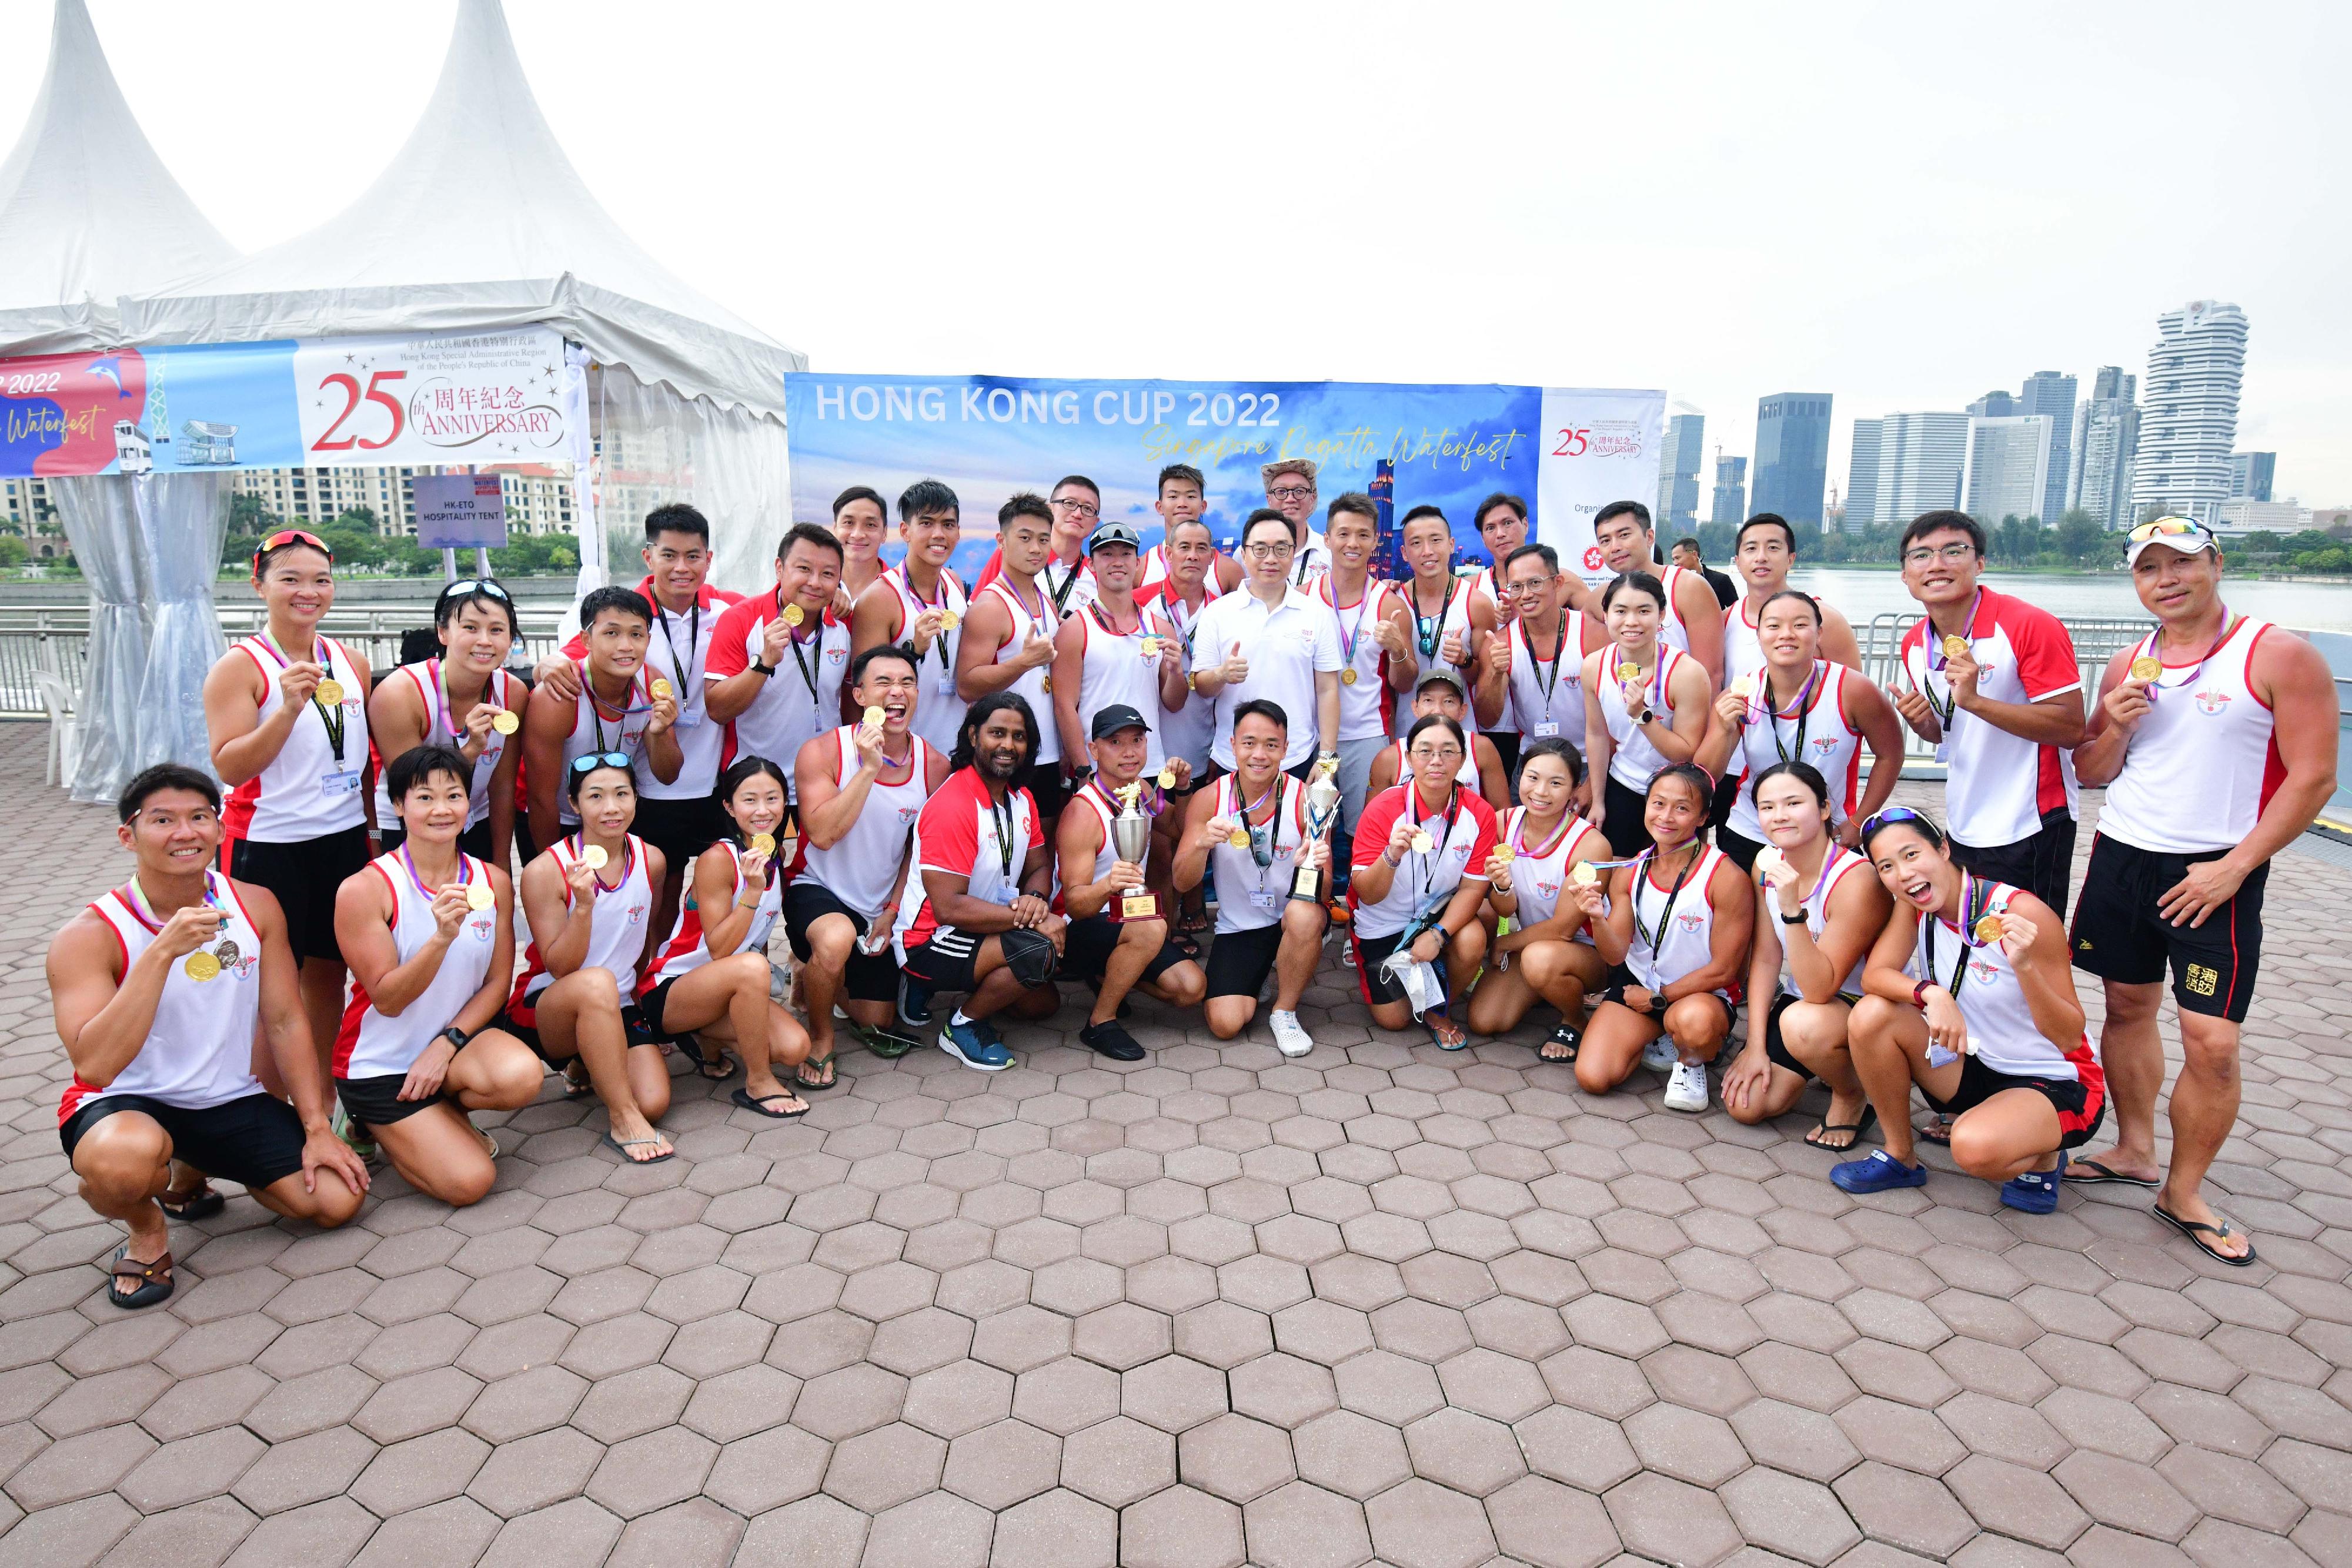 The Hong Kong Economic and Trade Office in Singapore (Singapore ETO) hosted the Hong Kong Cup 2022 dragon boat races during the Singapore Regatta Waterfest yesterday and today (December 3 and 4) to celebrate the 25th anniversary of the establishment of the Hong Kong Special Administrative Region. Photo shows the Director of the Singapore ETO, Mr Owin Fung (second row, eighth right), with the Hong Kong team, which finished first in the Hong Kong Cup Mixed race.